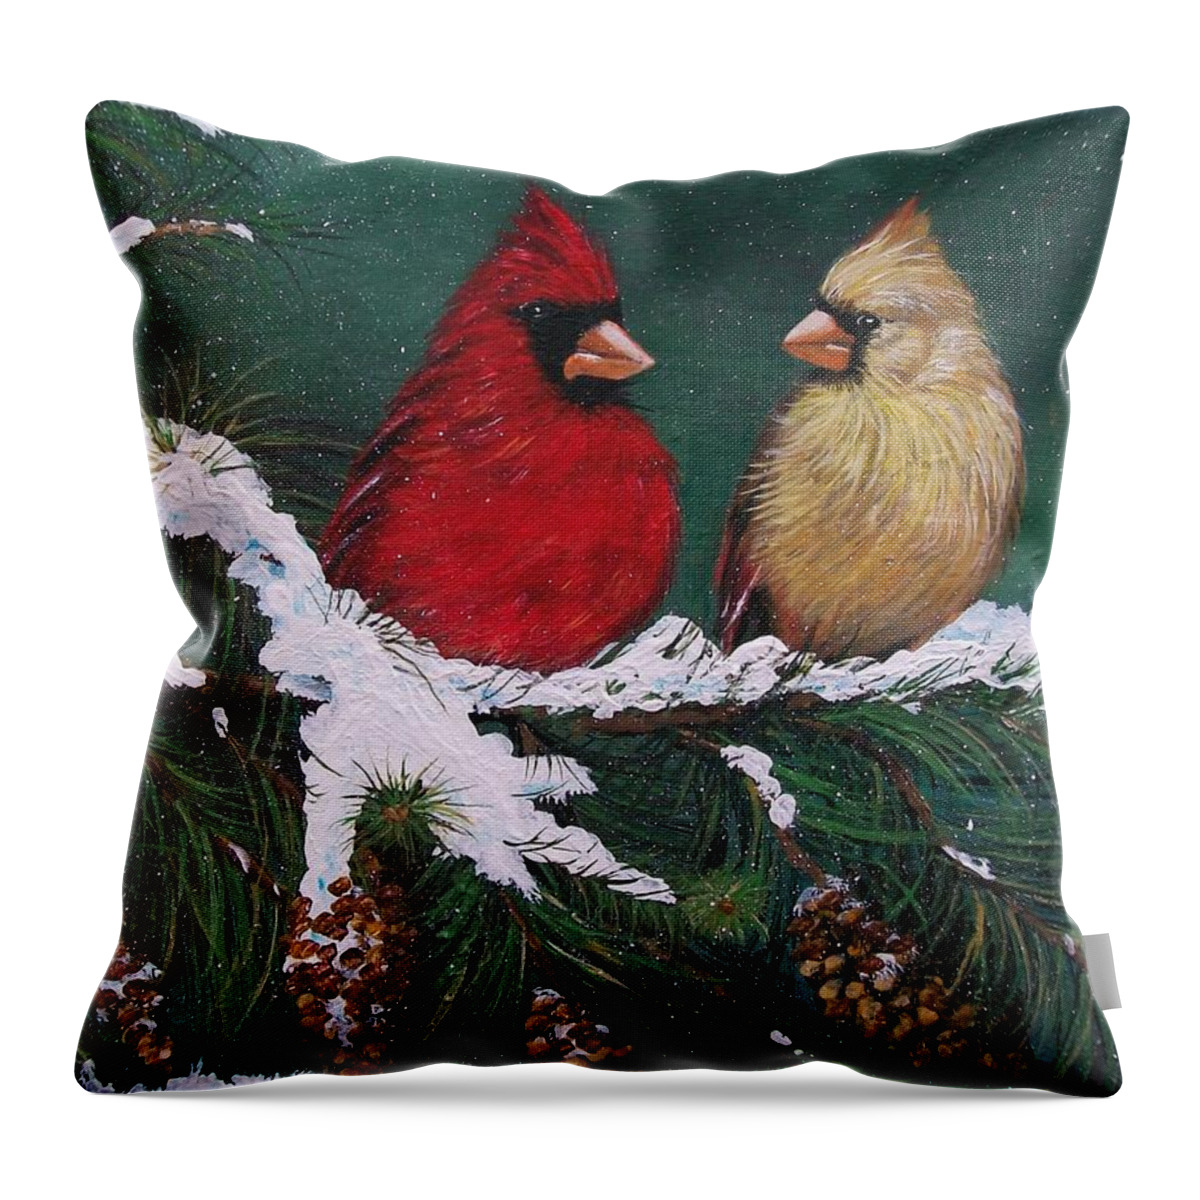  Christmas Throw Pillow featuring the painting Cardinals in the Snow by Sharon Duguay